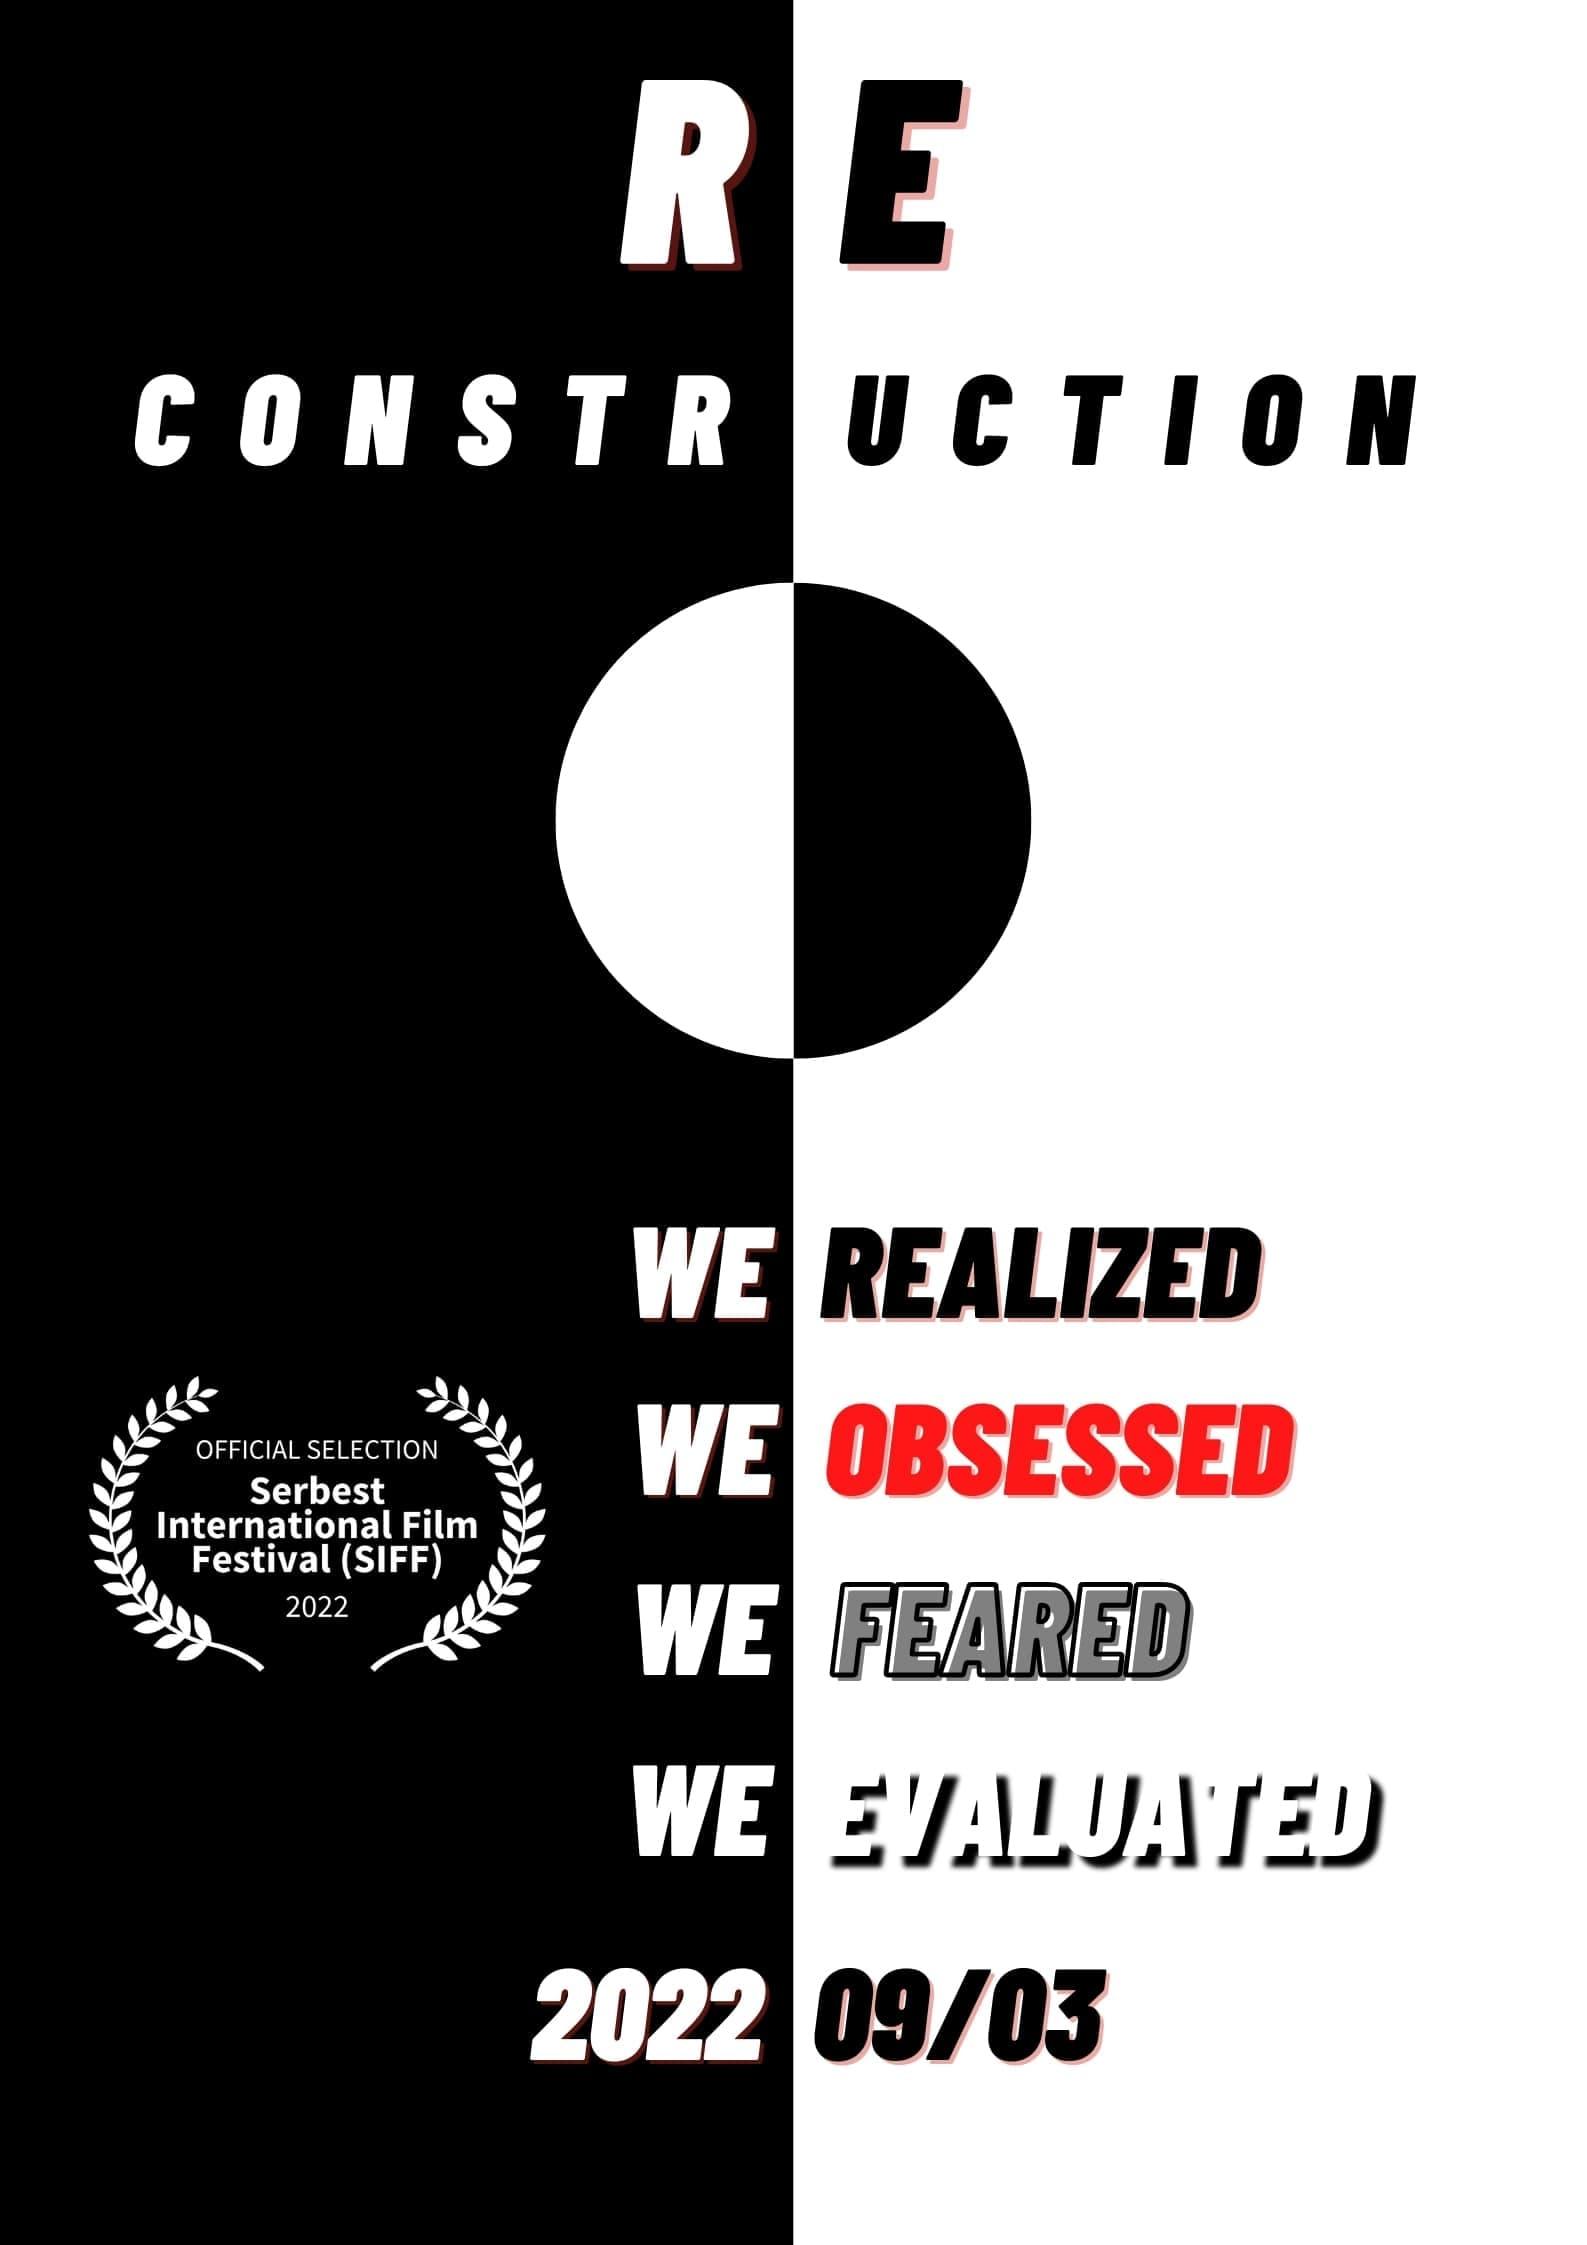 Reconstruction poster